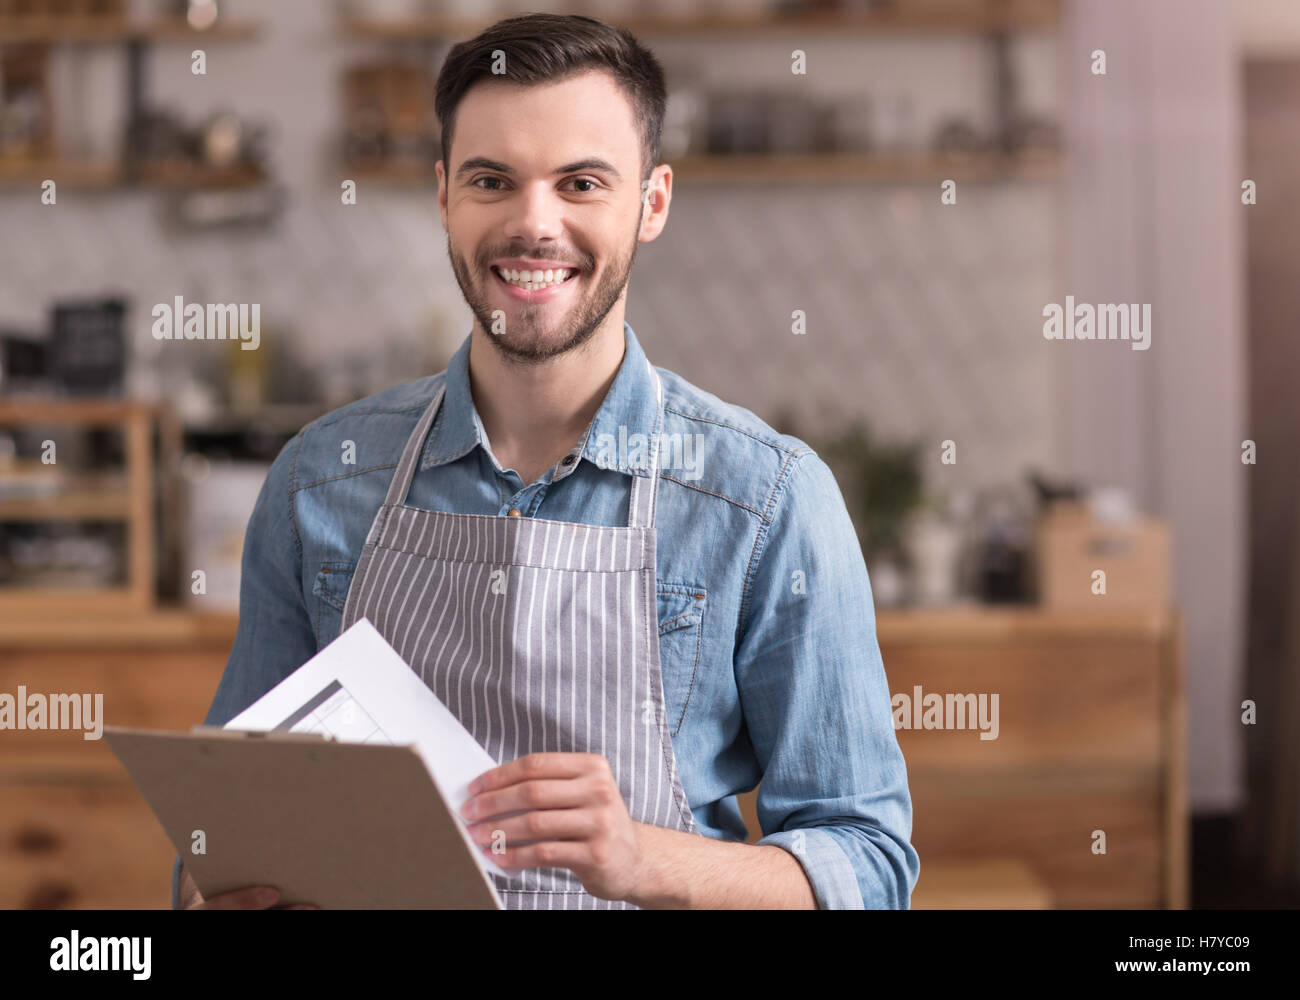 Delighted young smiling man holding a folder. Stock Photo